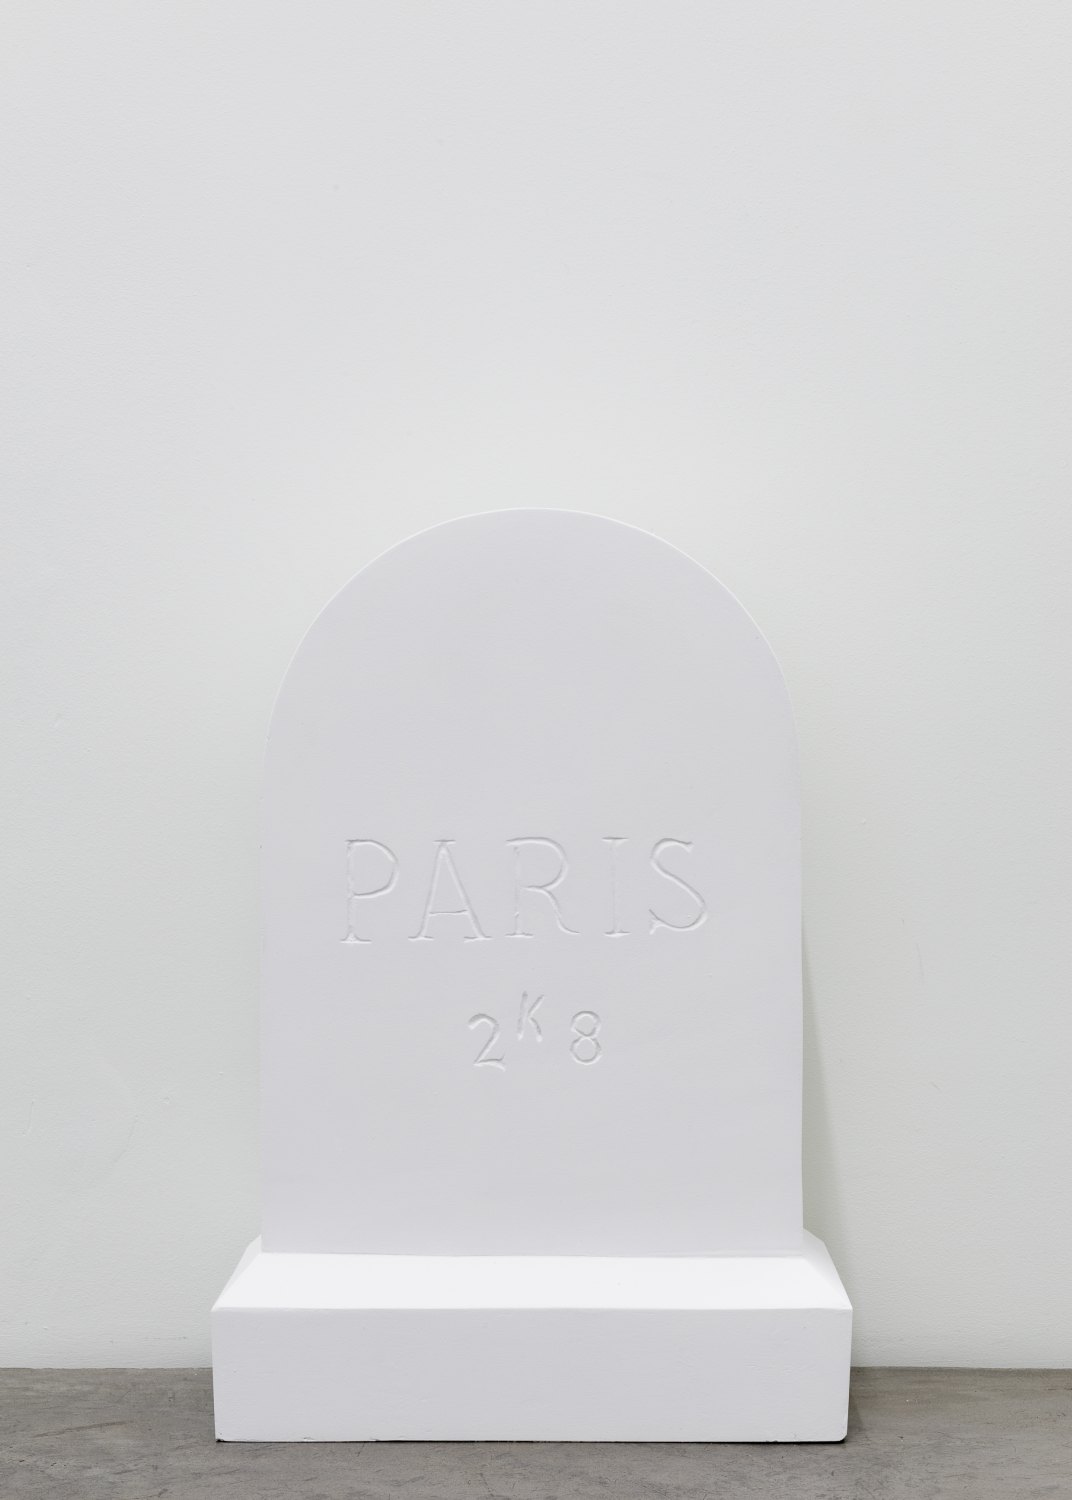 Claire Fontaine Untitled (Milestone), 2016 Polystyrene, cement, plaster of paris, and white wash, 70,5 x 47,5 x 26 cm  